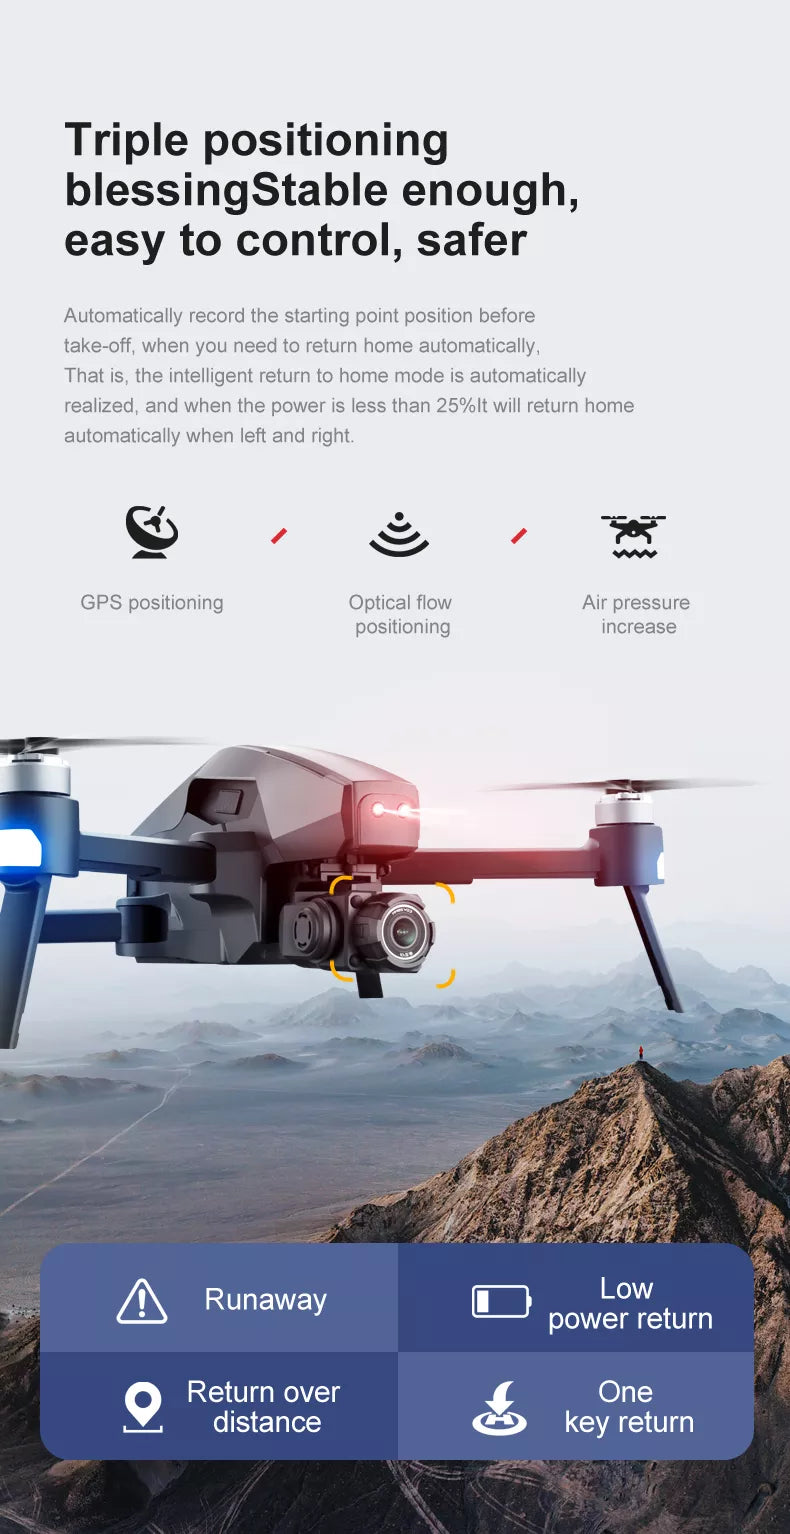 4DRC M1 Pro 2 drone, return to home mode automatically realized when power is less than 25%lt